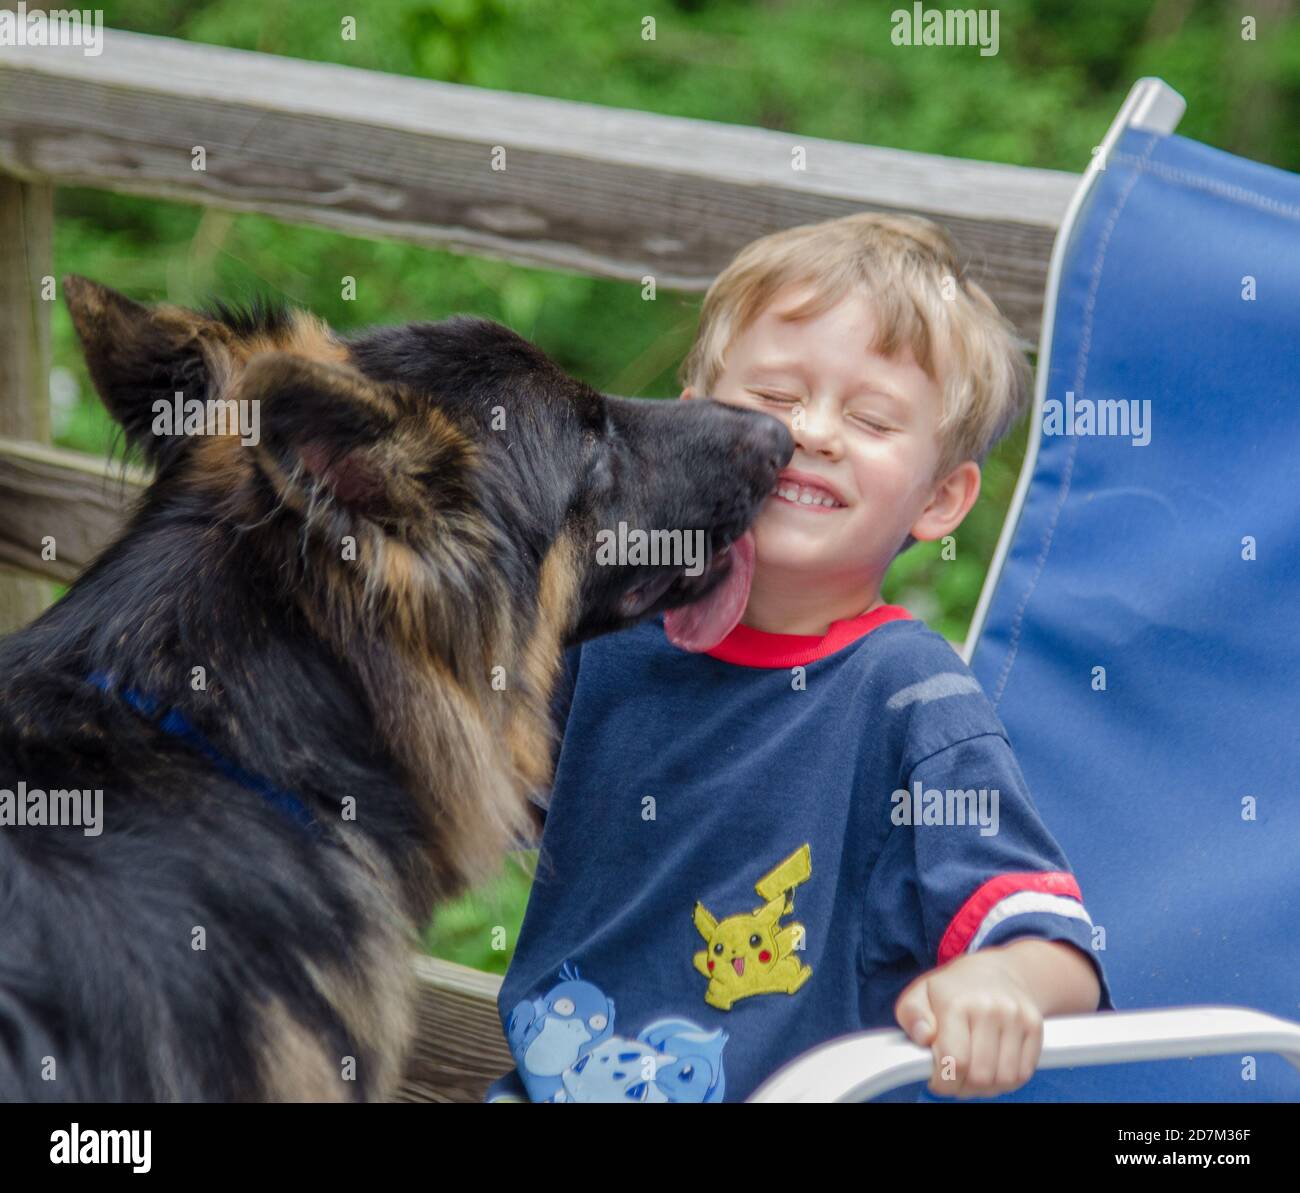 A German Shepherd dog licks the face of a young boy. Photo by Liz Roll Stock Photo